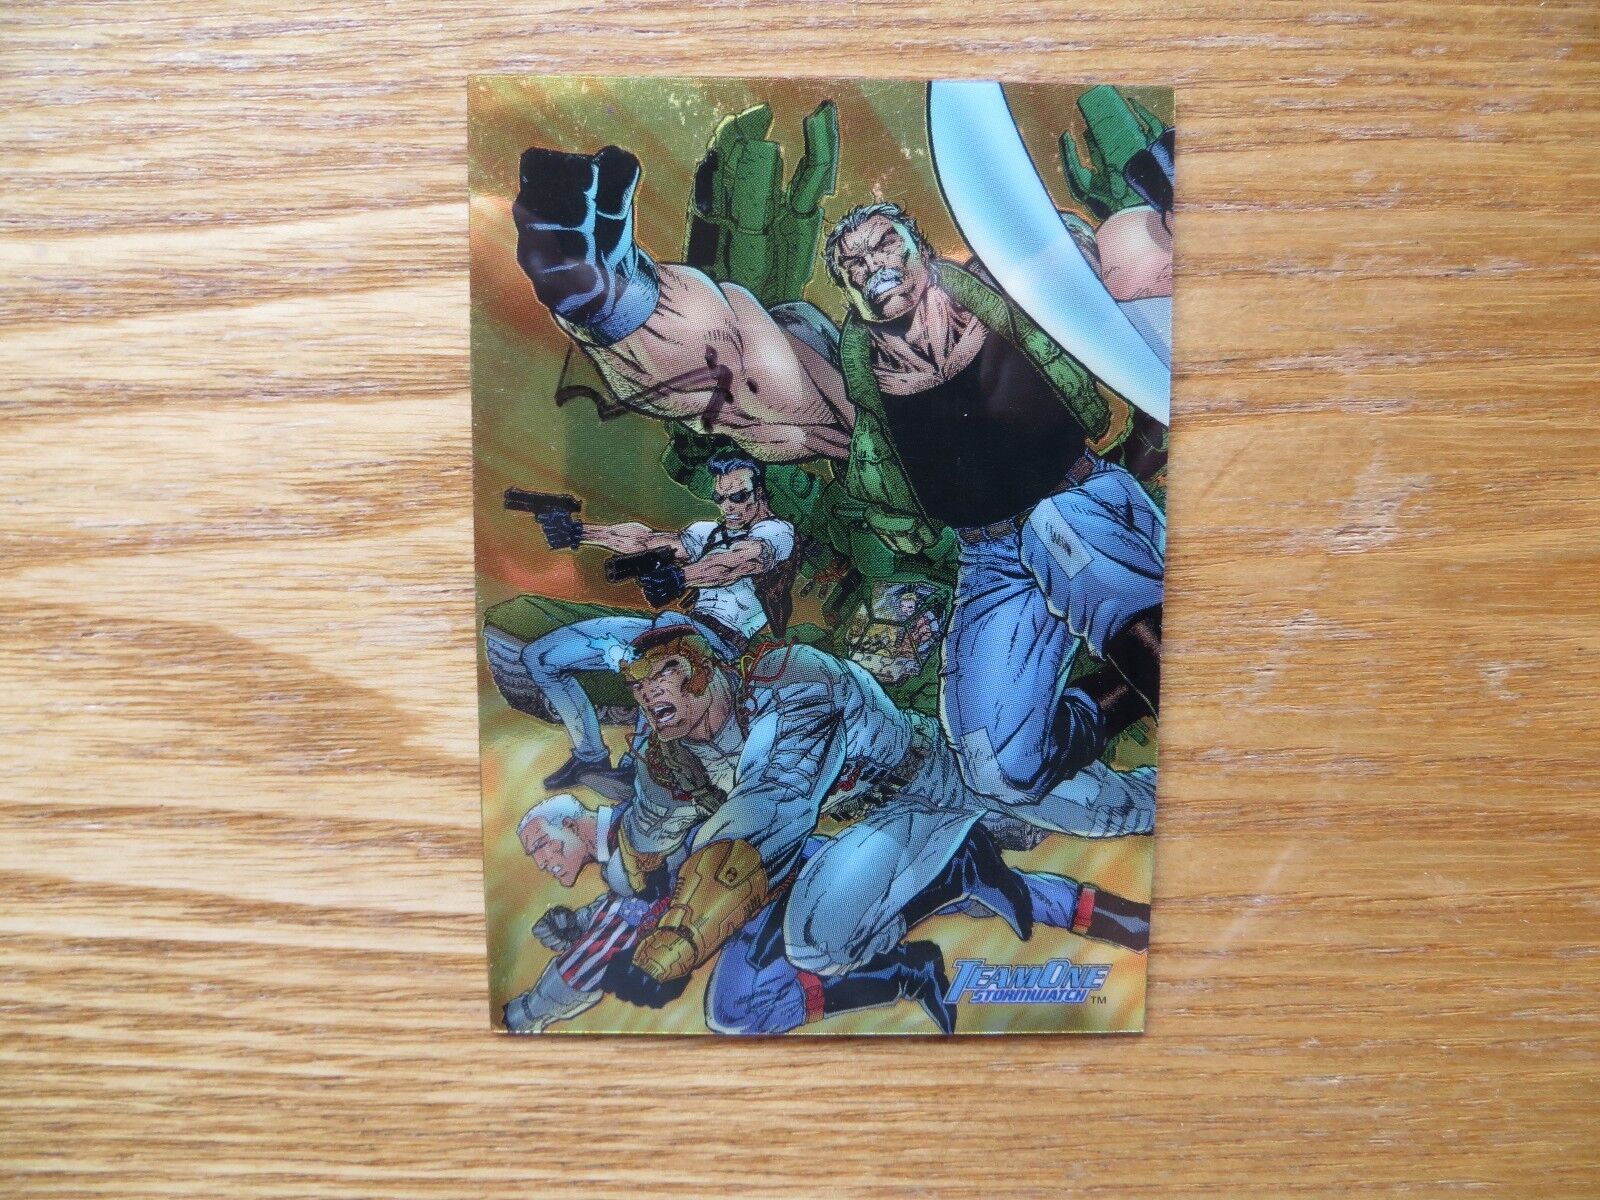 1996 WILDSTORM ARCHIVES CHROMIUM TEAM ONE CARD # 185 SIGNED TOM RANEY,WITH POA